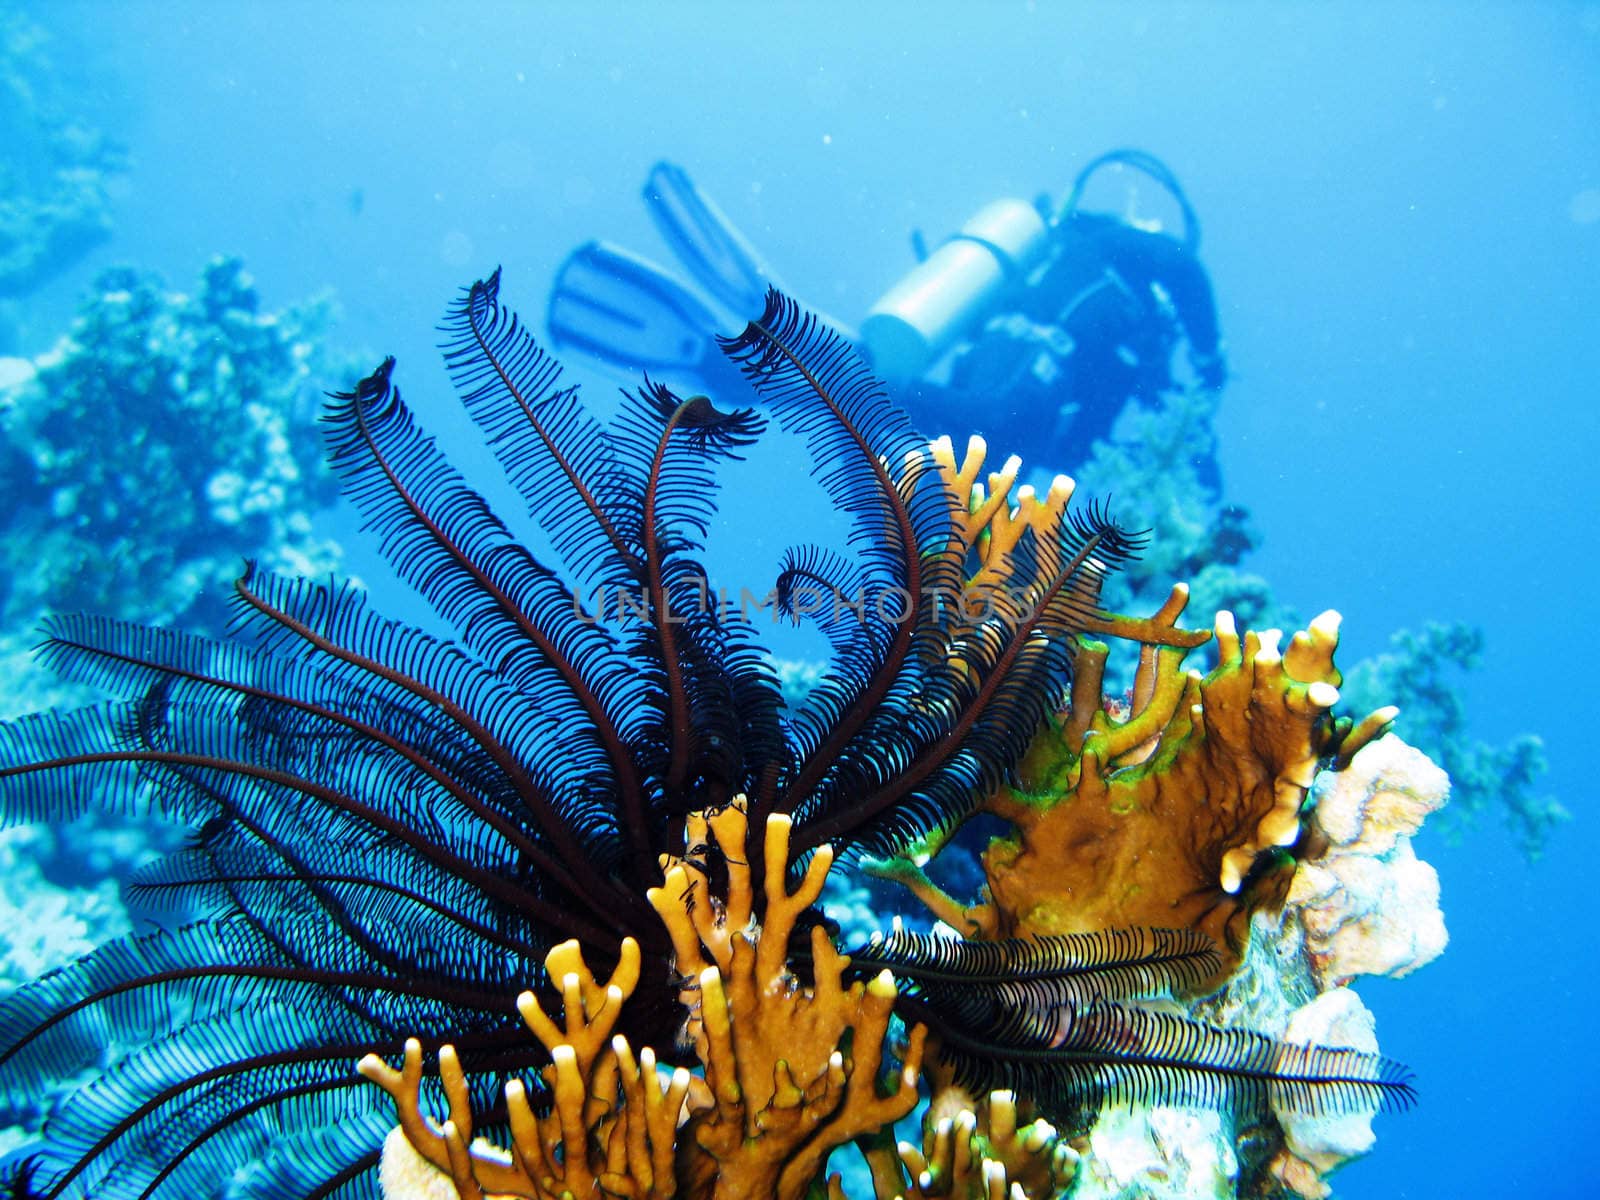 A Crinoid on a Fire Coral in the Red Sea.